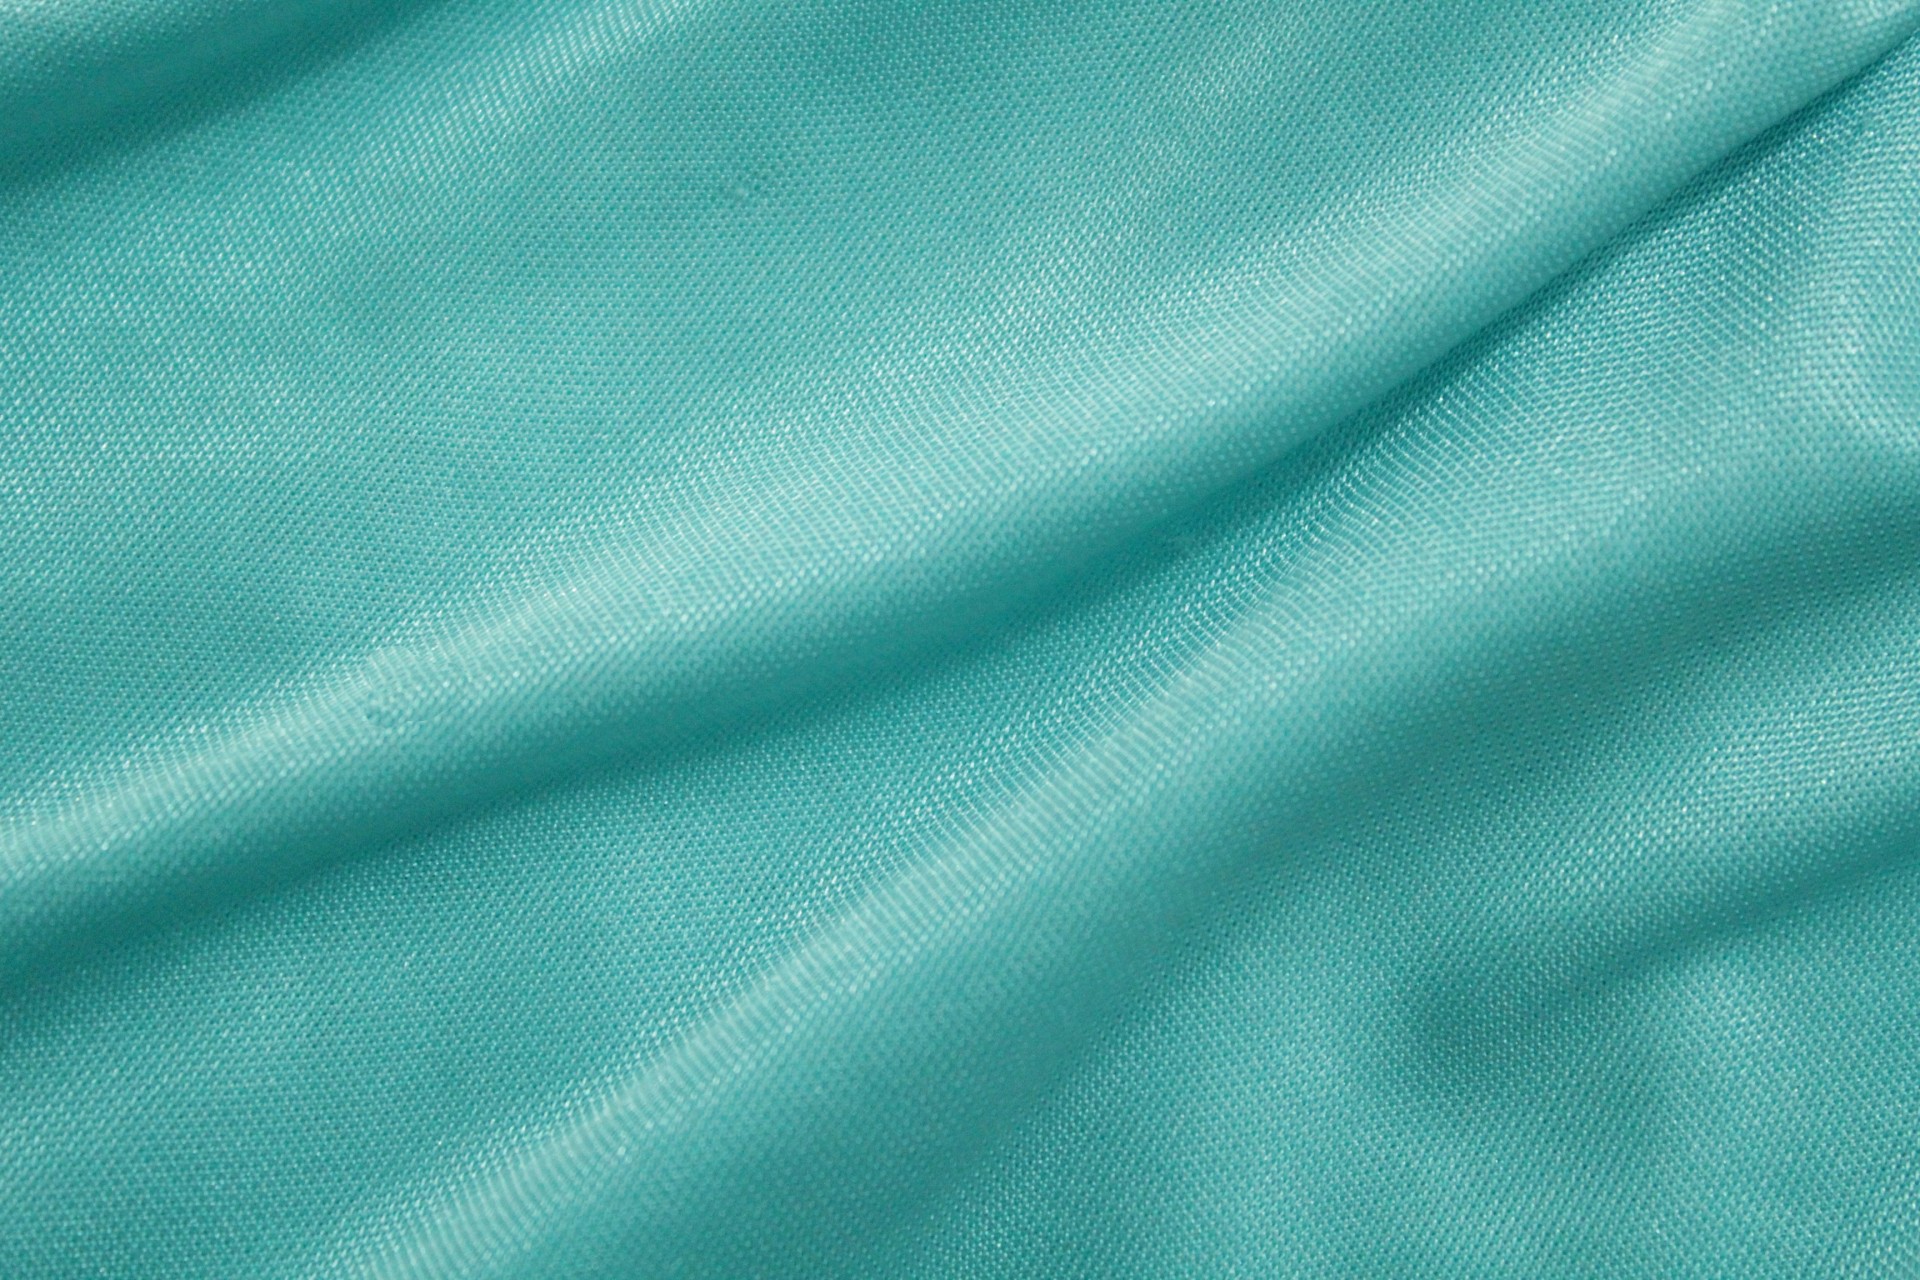 Blue Silk Cloth Background Free Stock Photo Public HD Wallpapers Download Free Images Wallpaper [wallpaper981.blogspot.com]